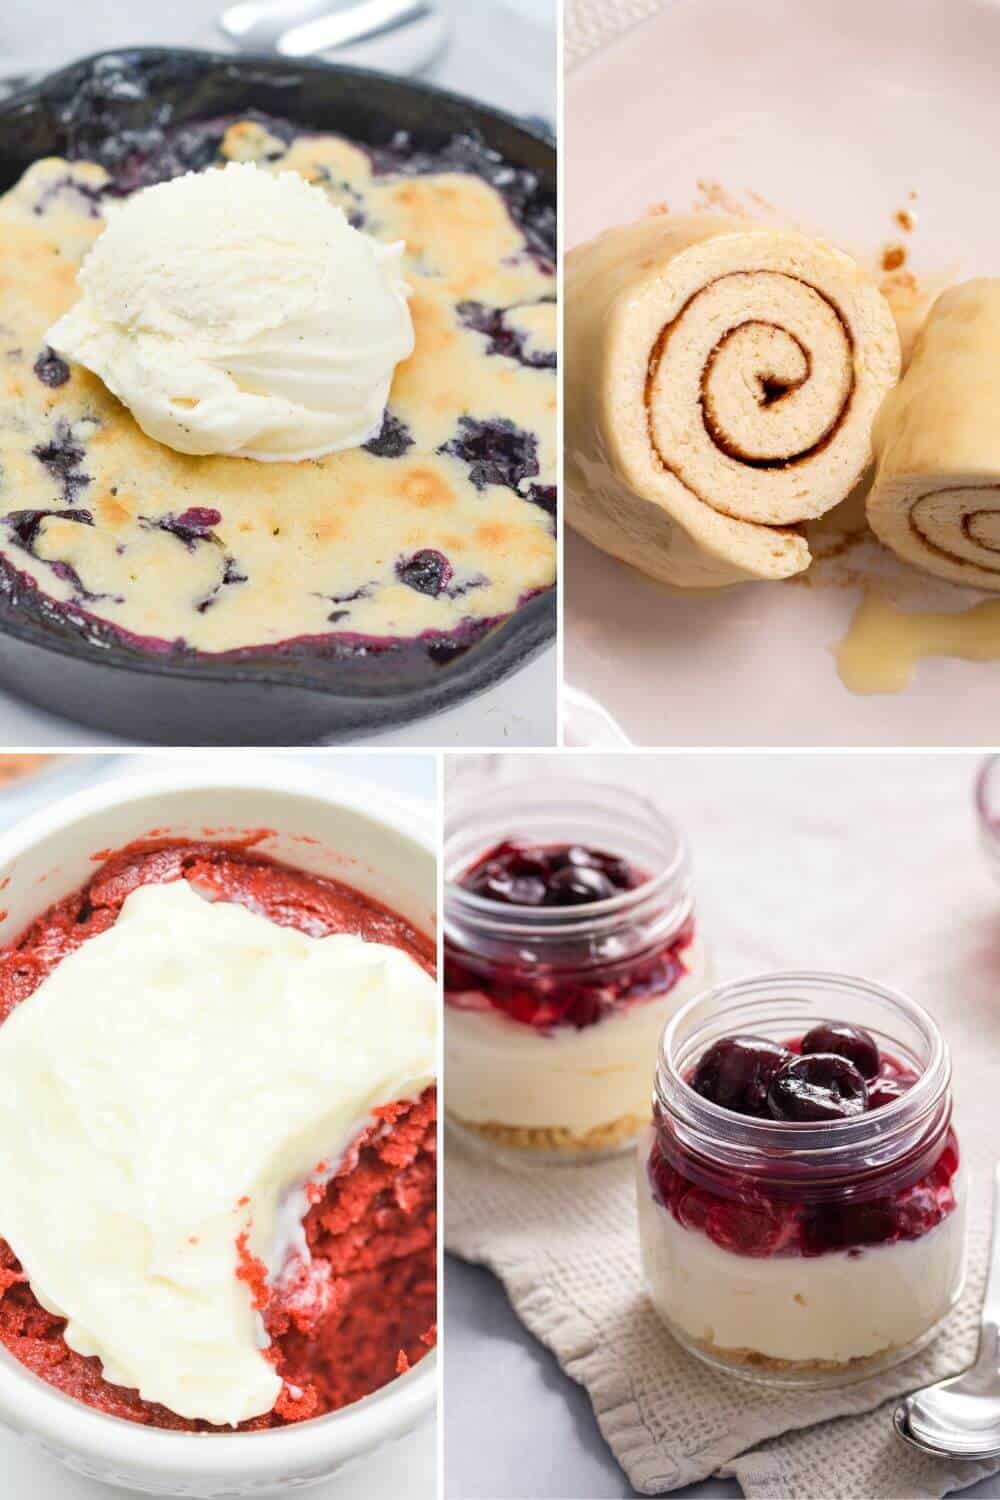 A collage of egg-free desserts for every sweet tooth craving.